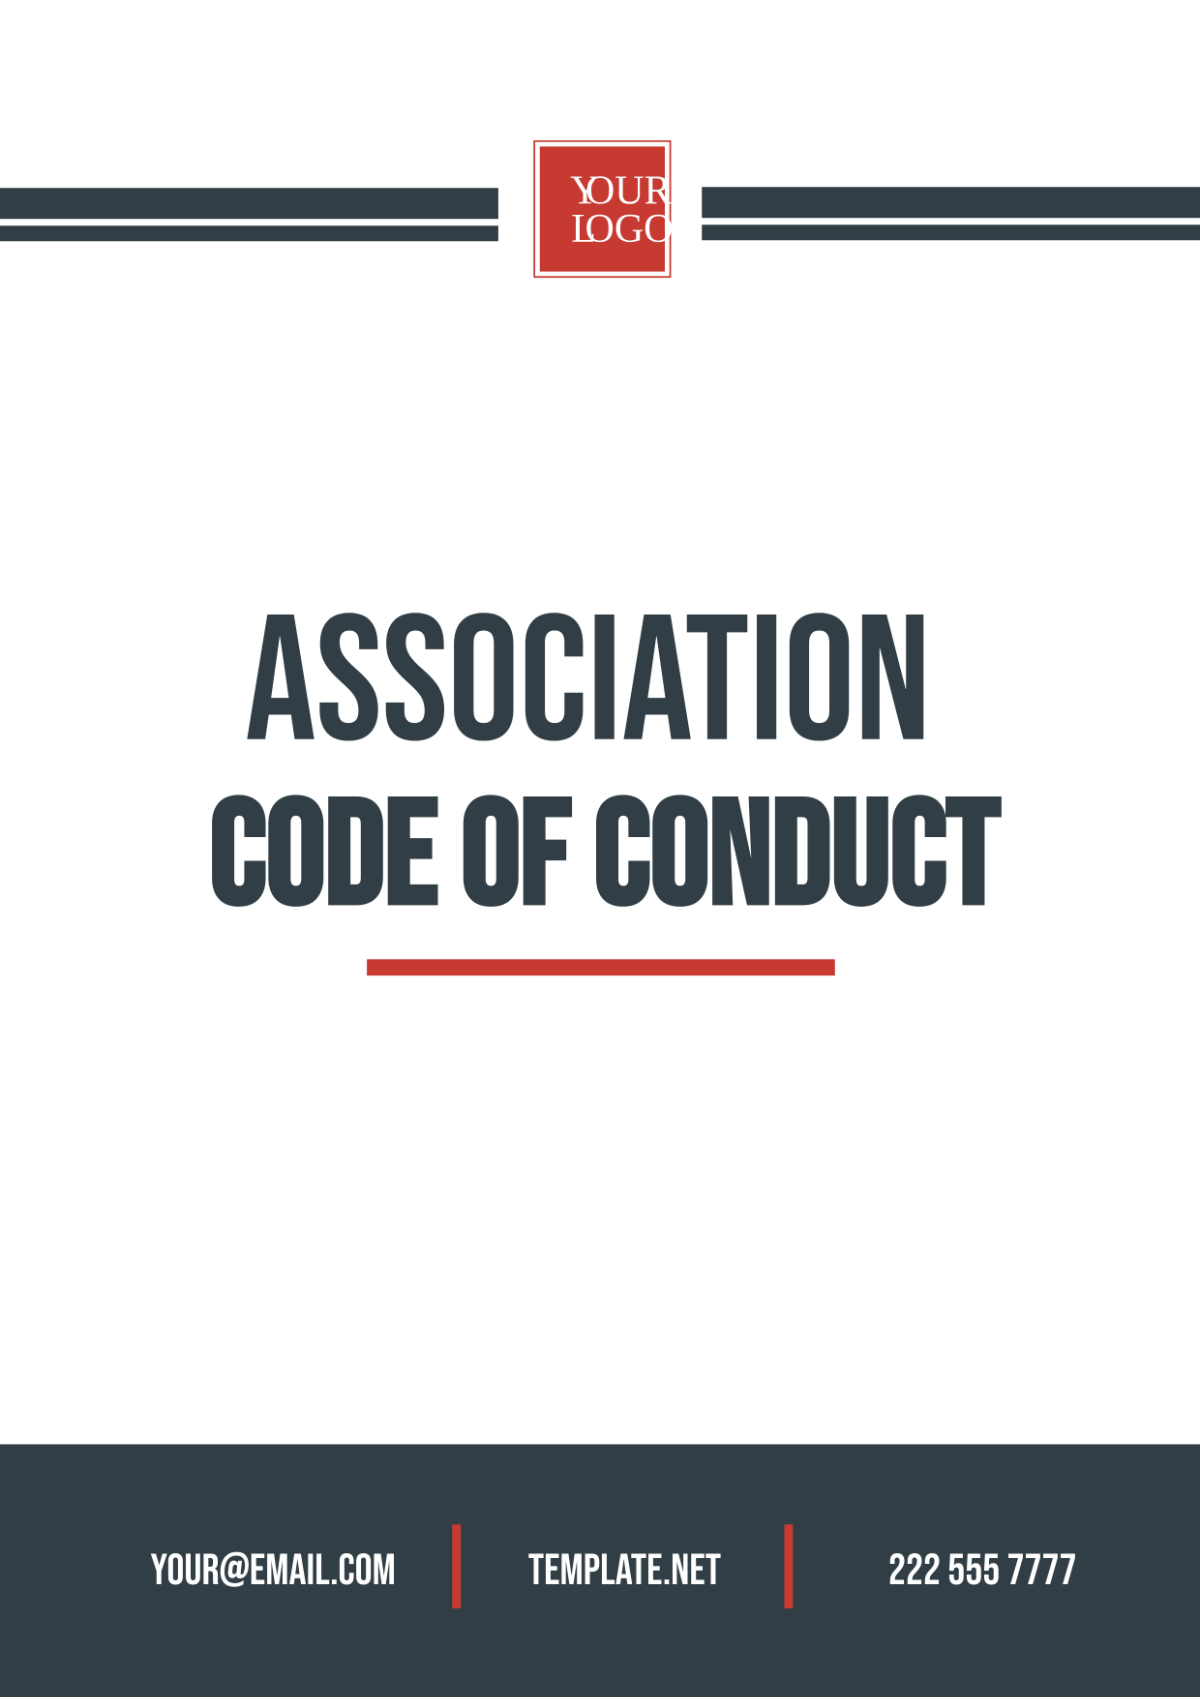 Association Code of Conduct Template